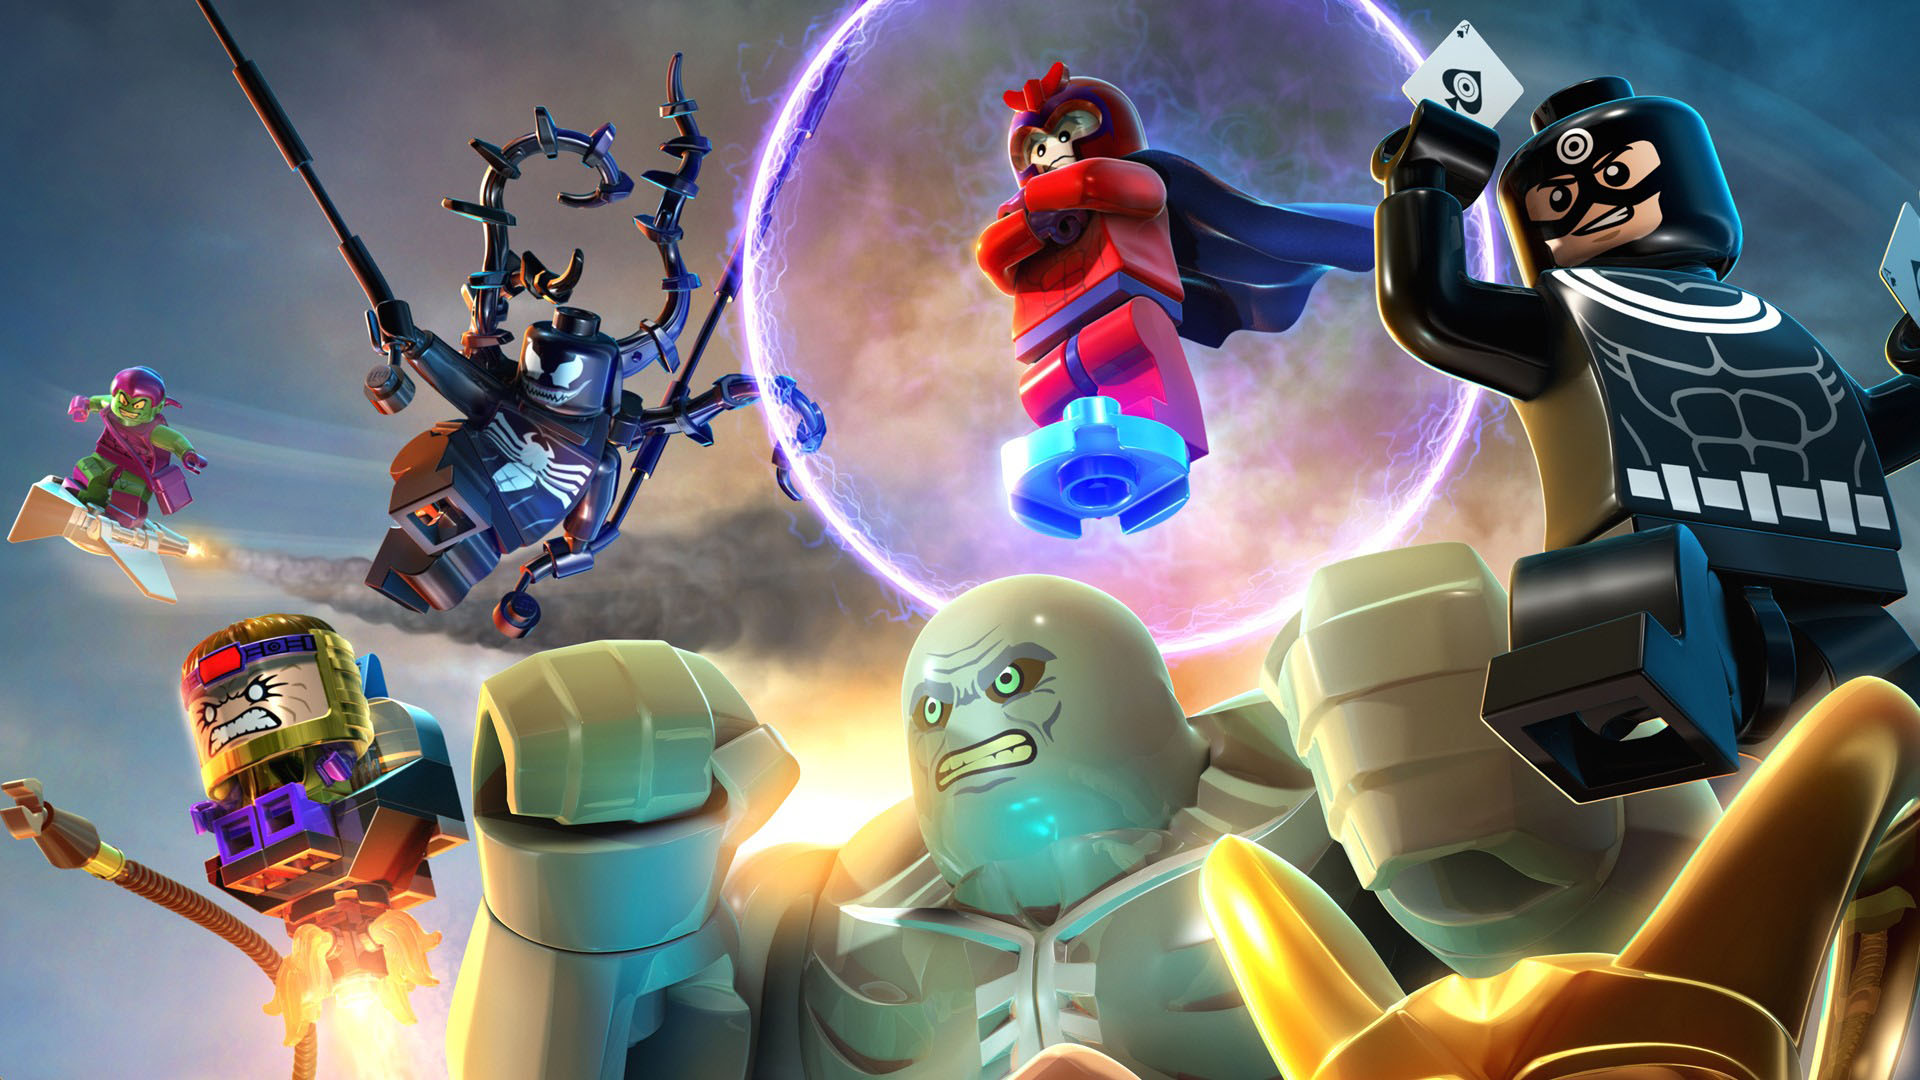 lego marvel super heroes characters powers